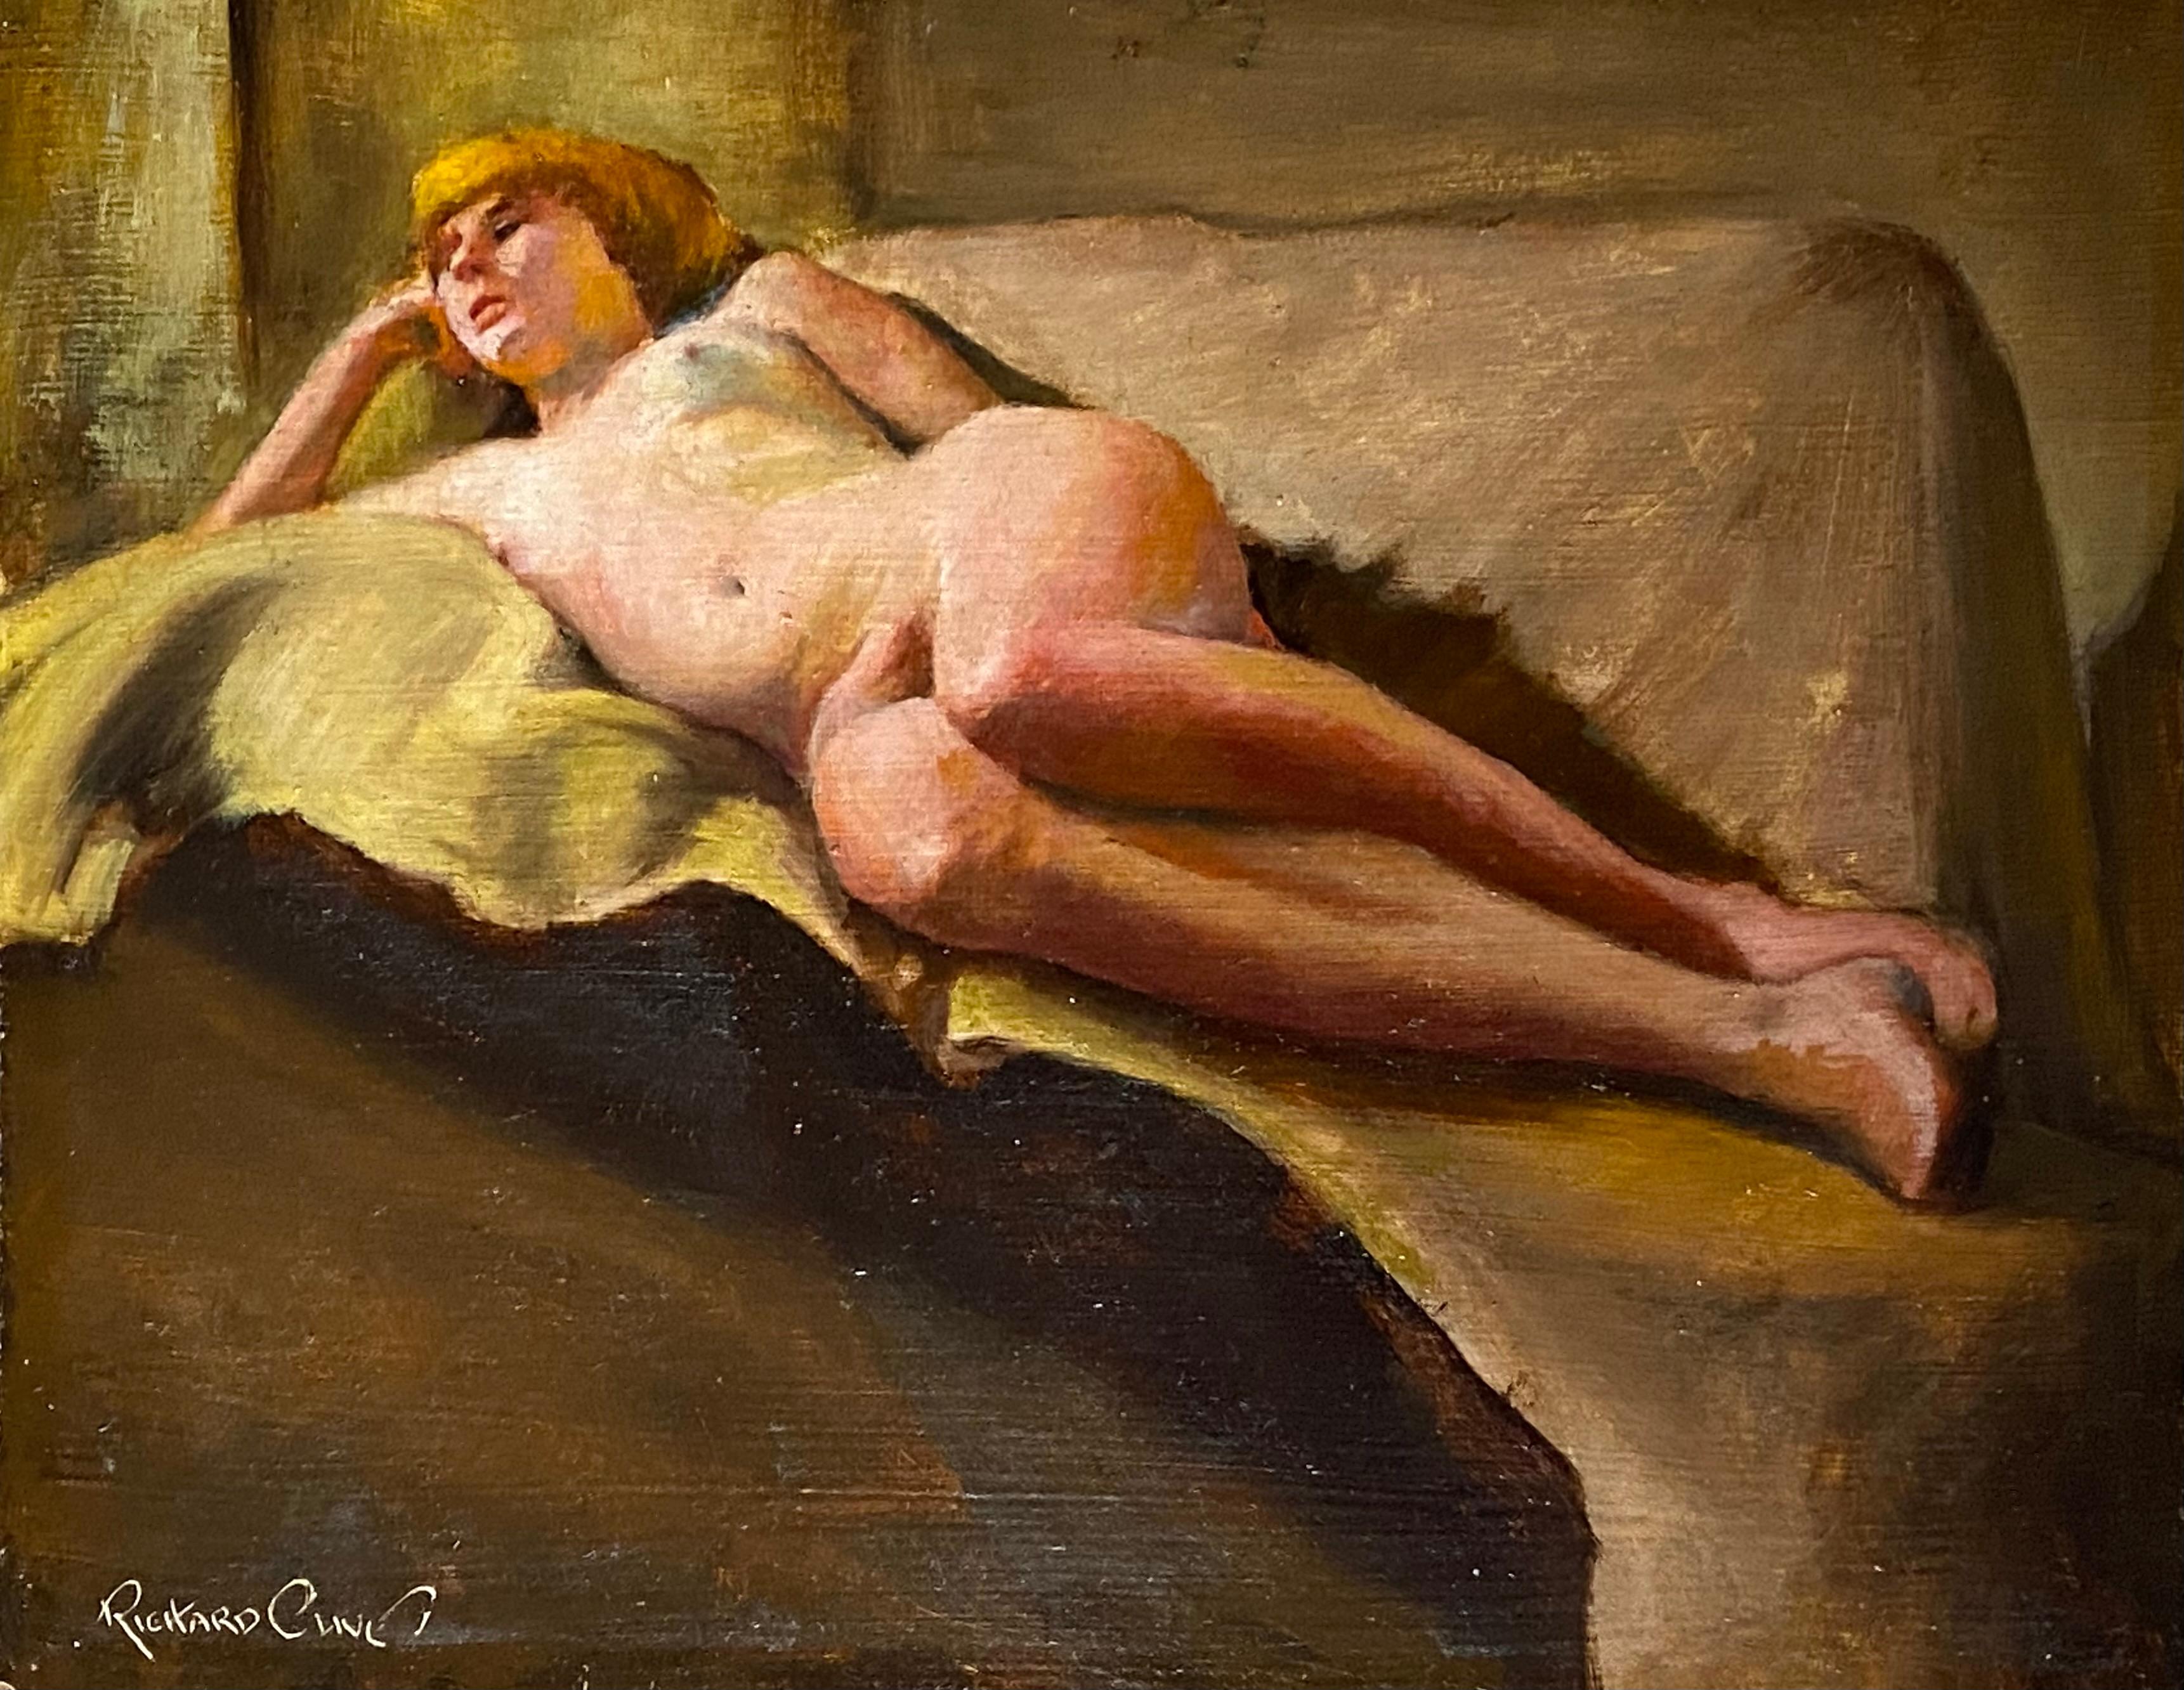 Richard Clive Nude Painting - “Reclining Female Nude”